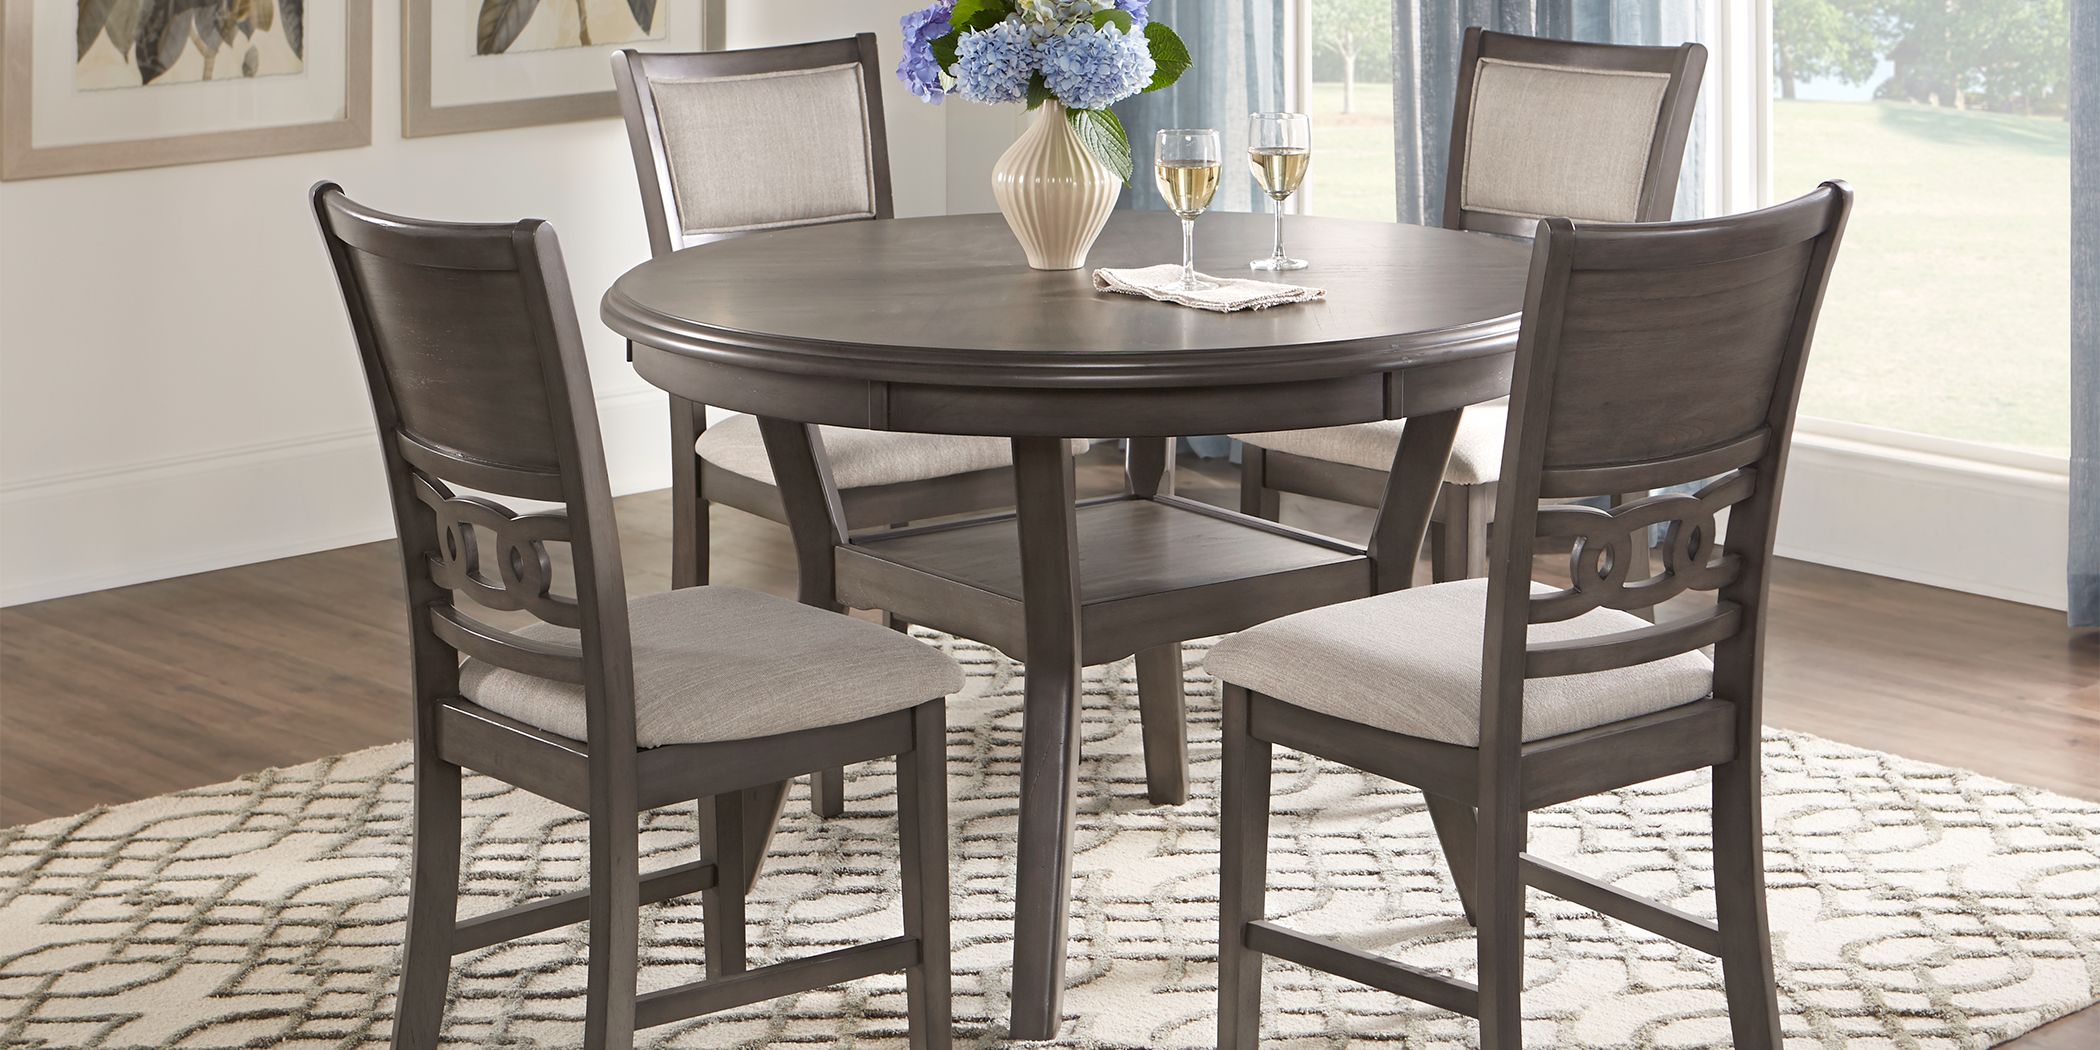 Rooms To Go Dining Room Furniture, Rooms To Go Dining Room Sets